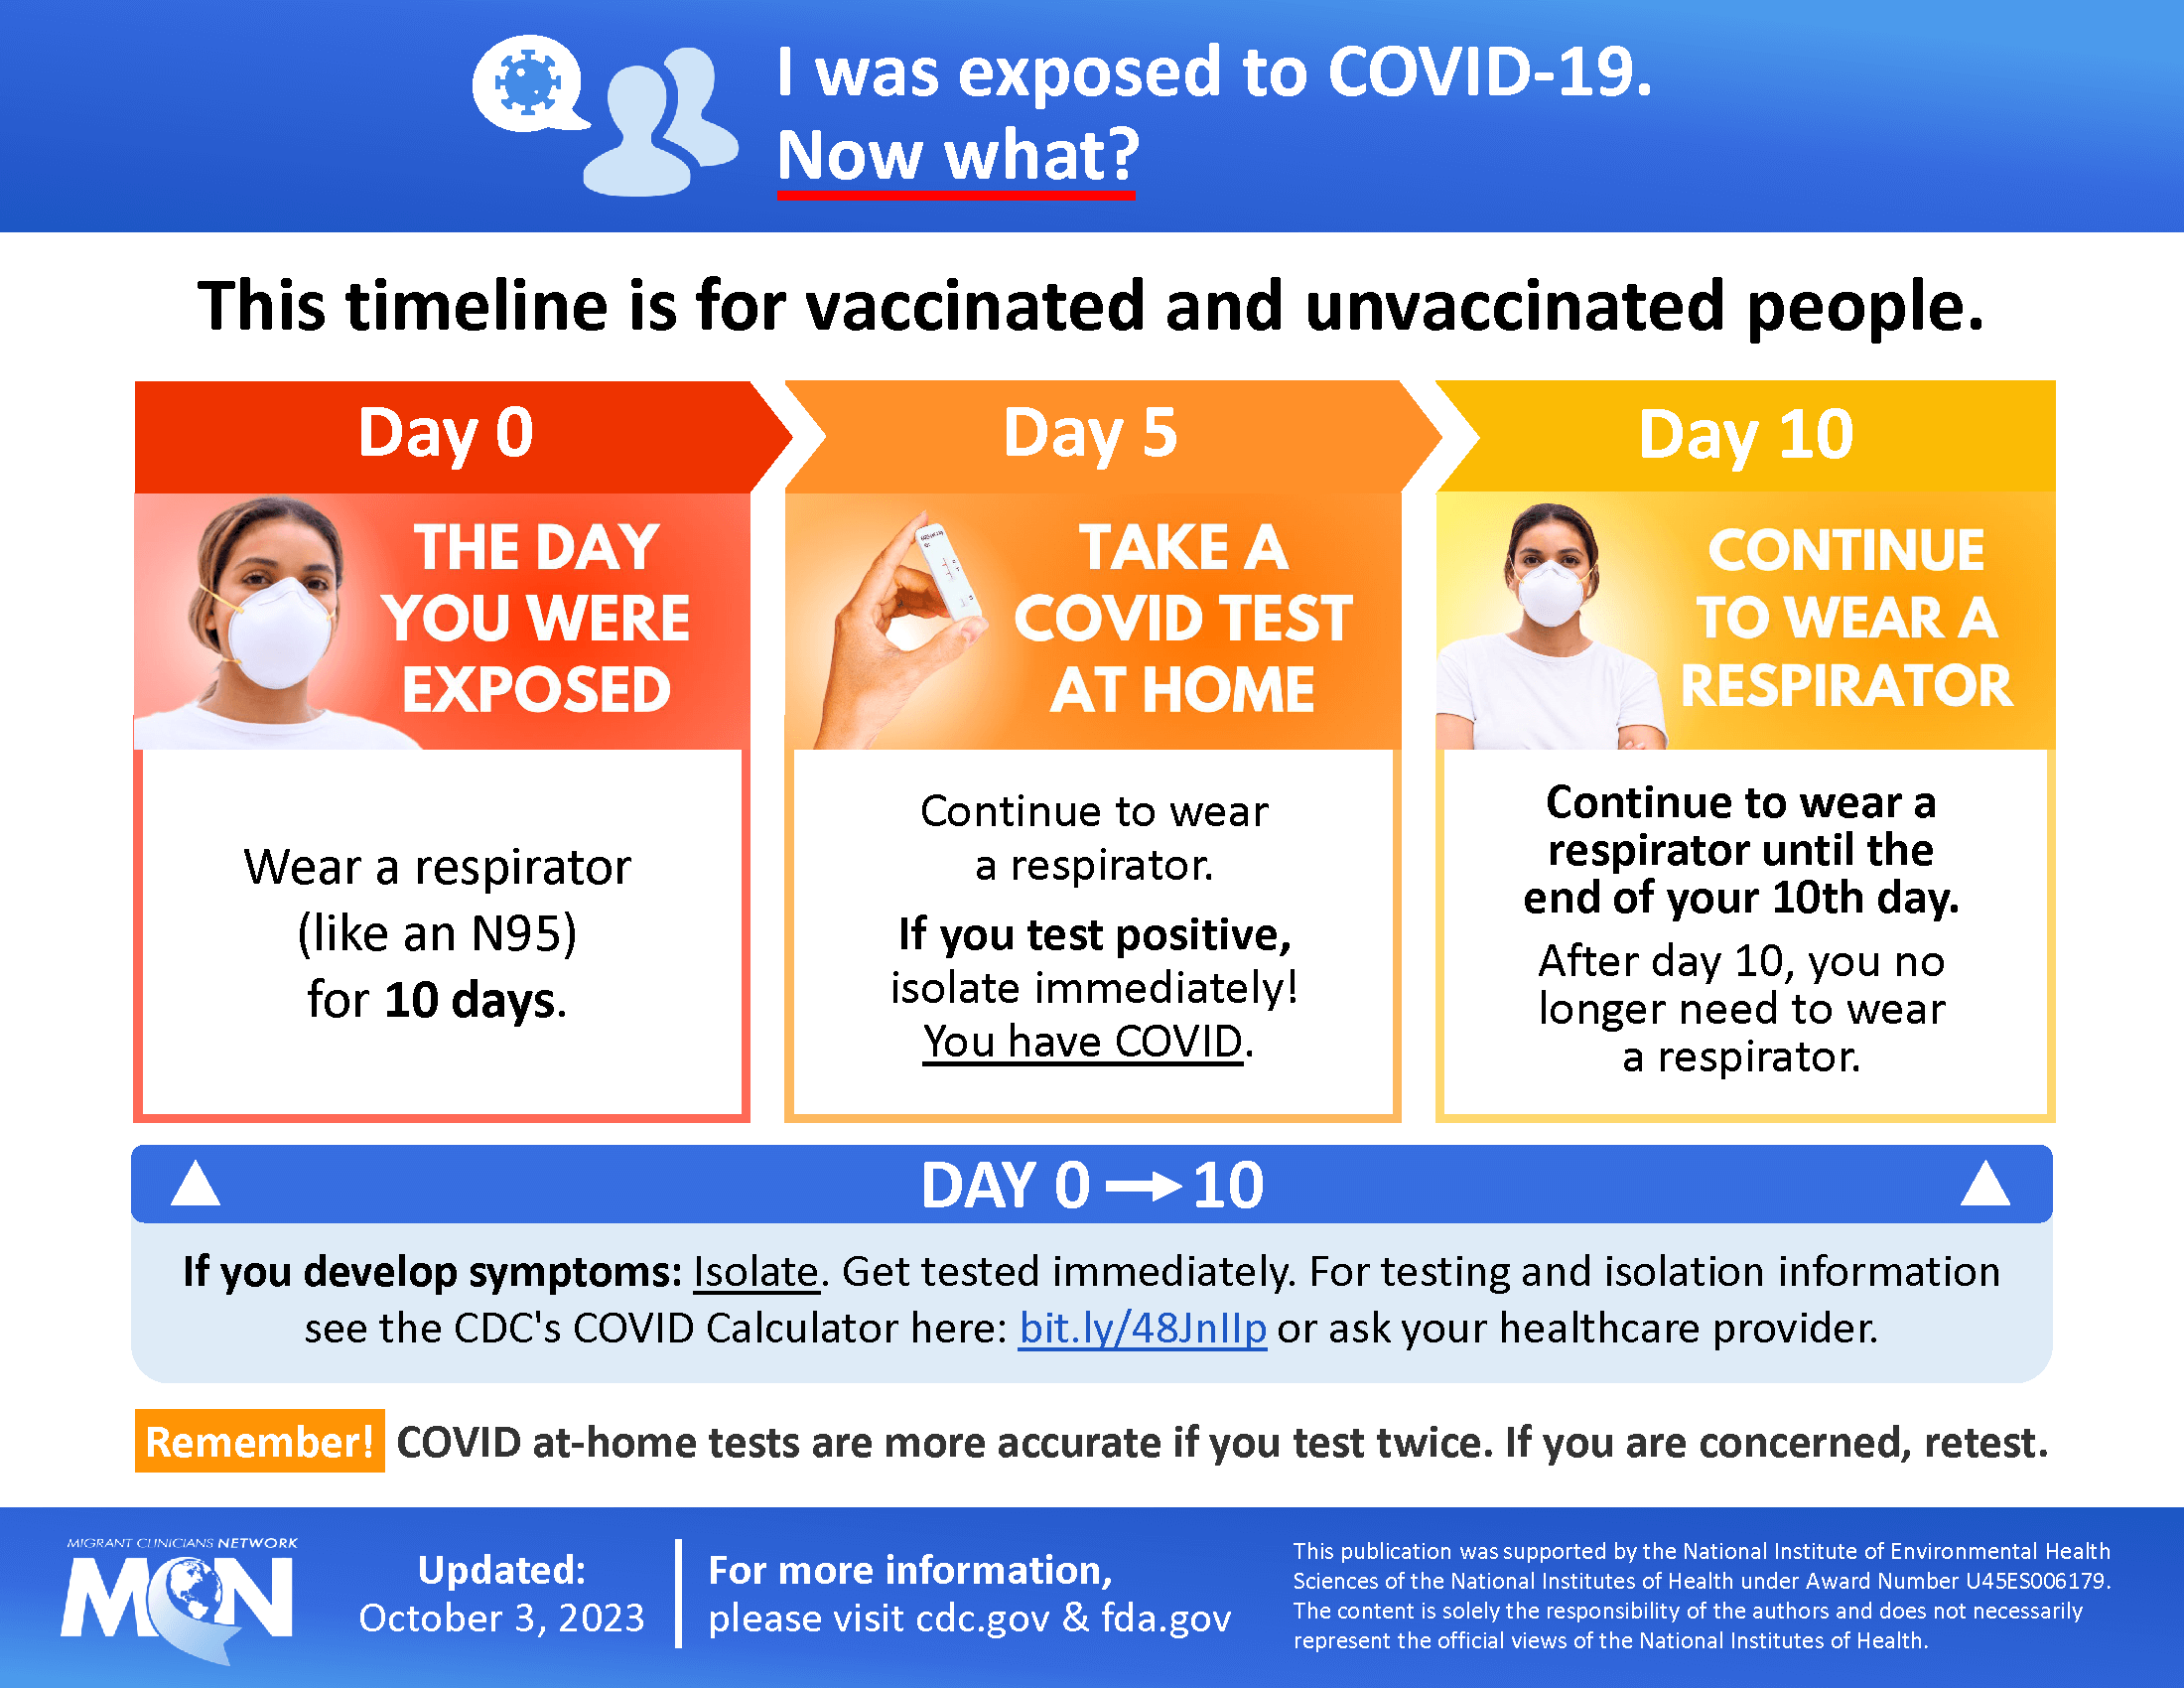 I Was Exposed to COVID-19. Now What?